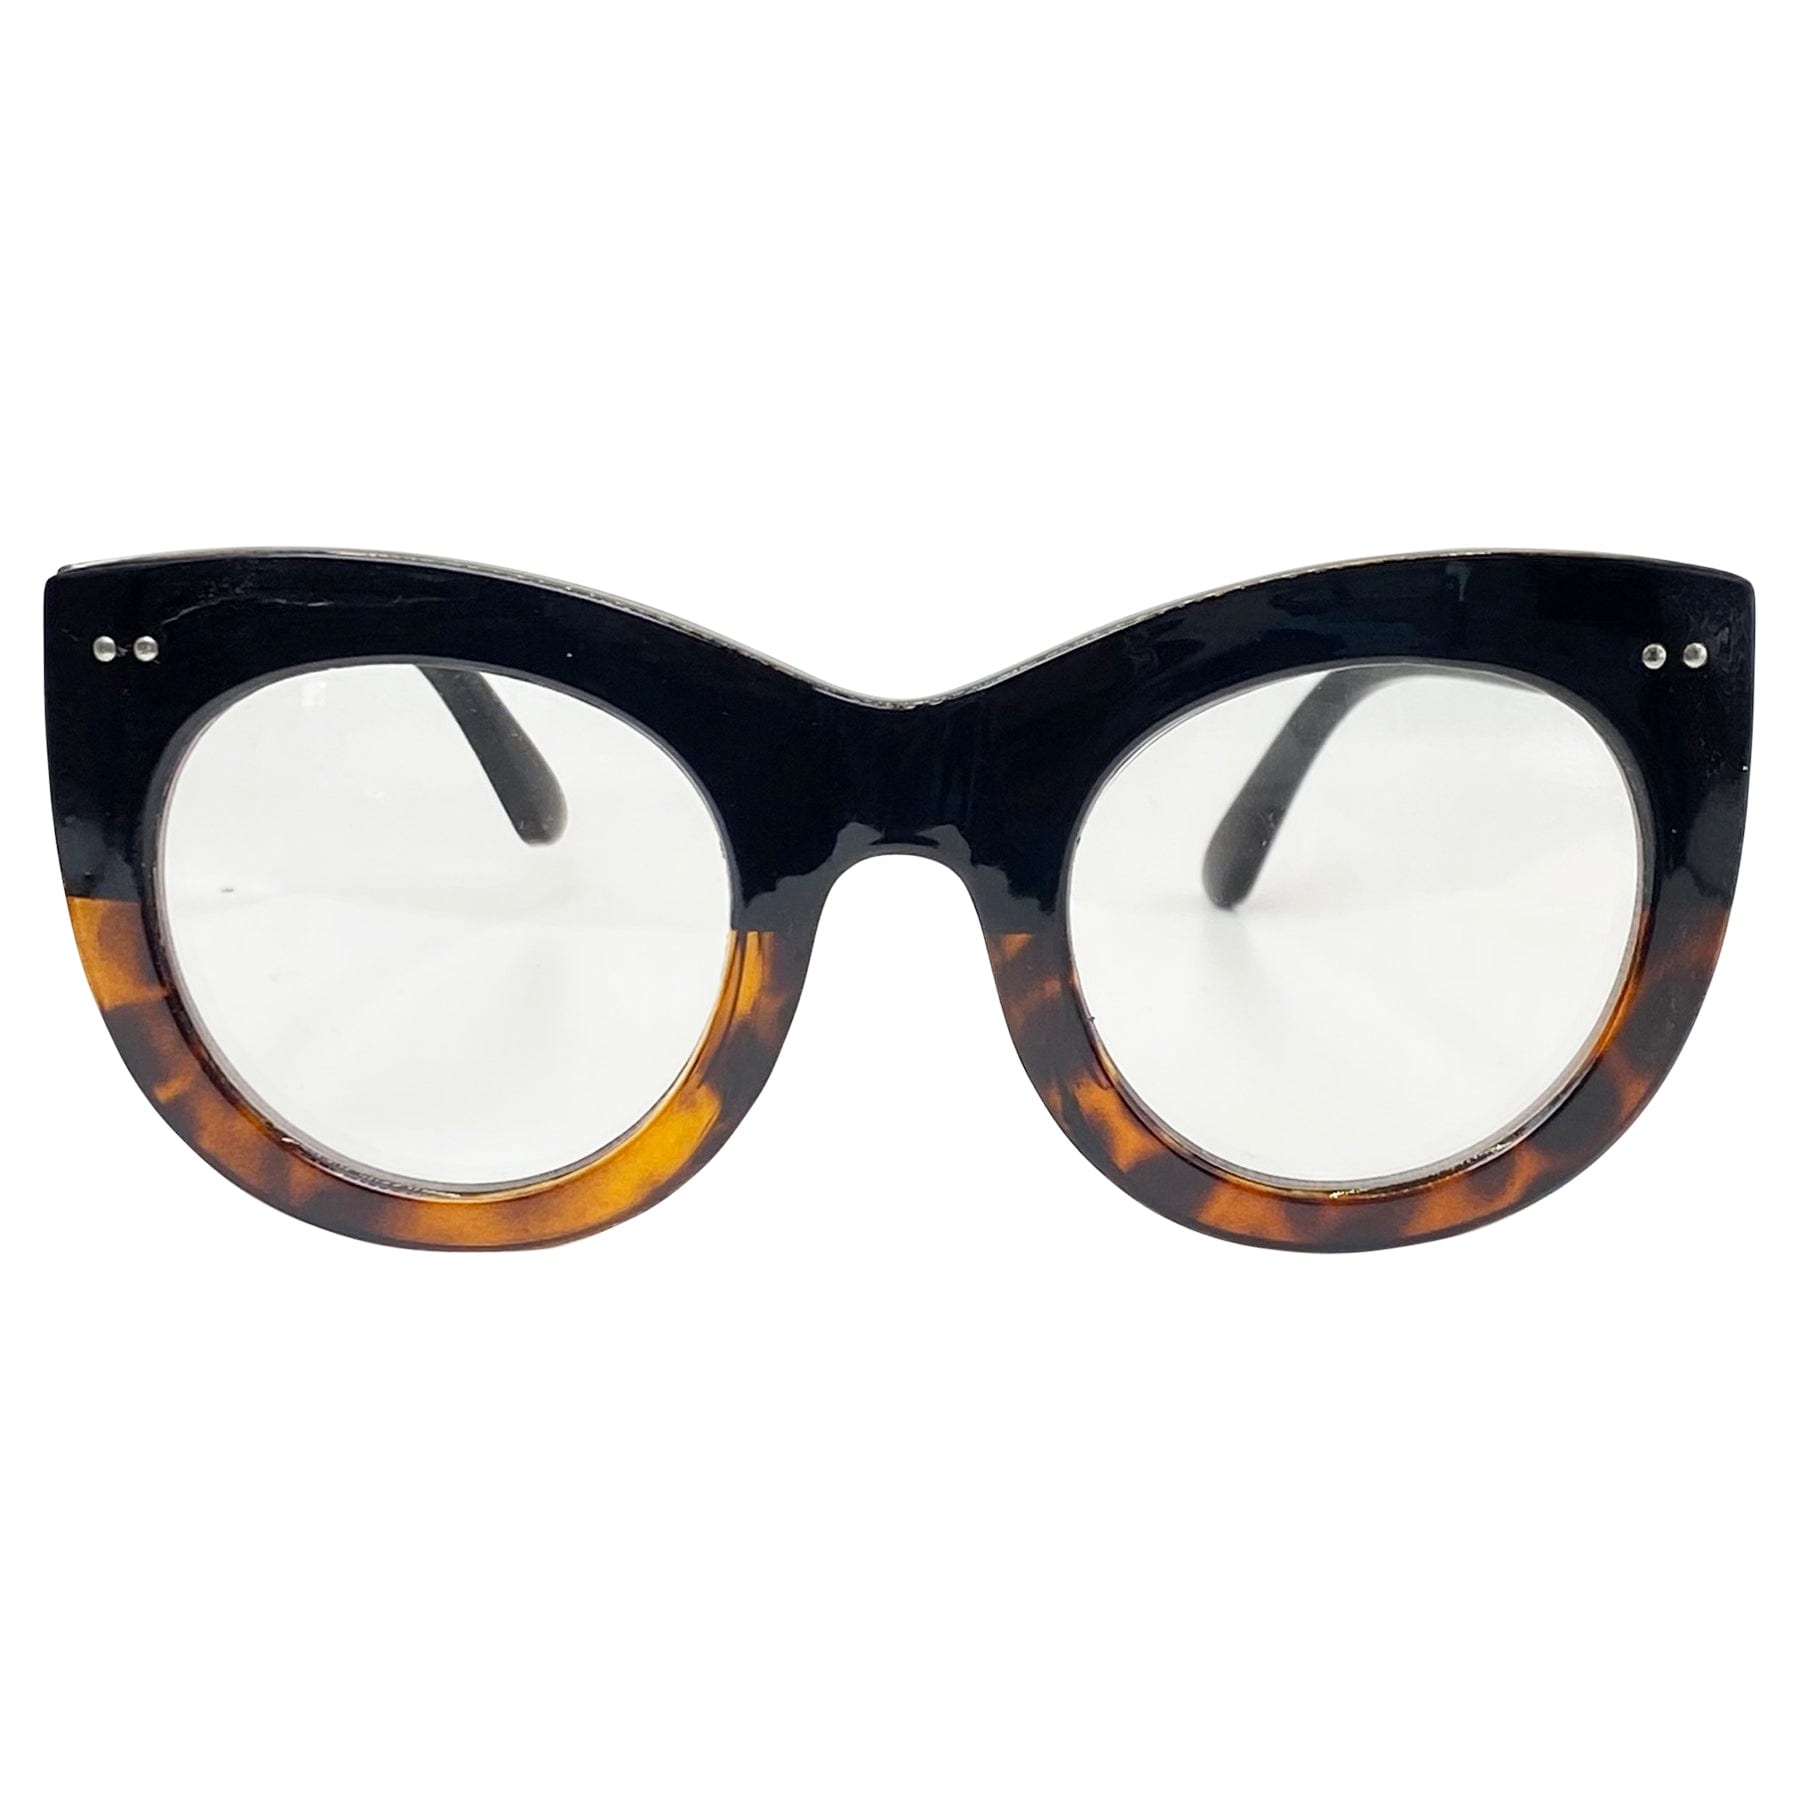 cat eye clear round glasses with black and tortoise colored frame